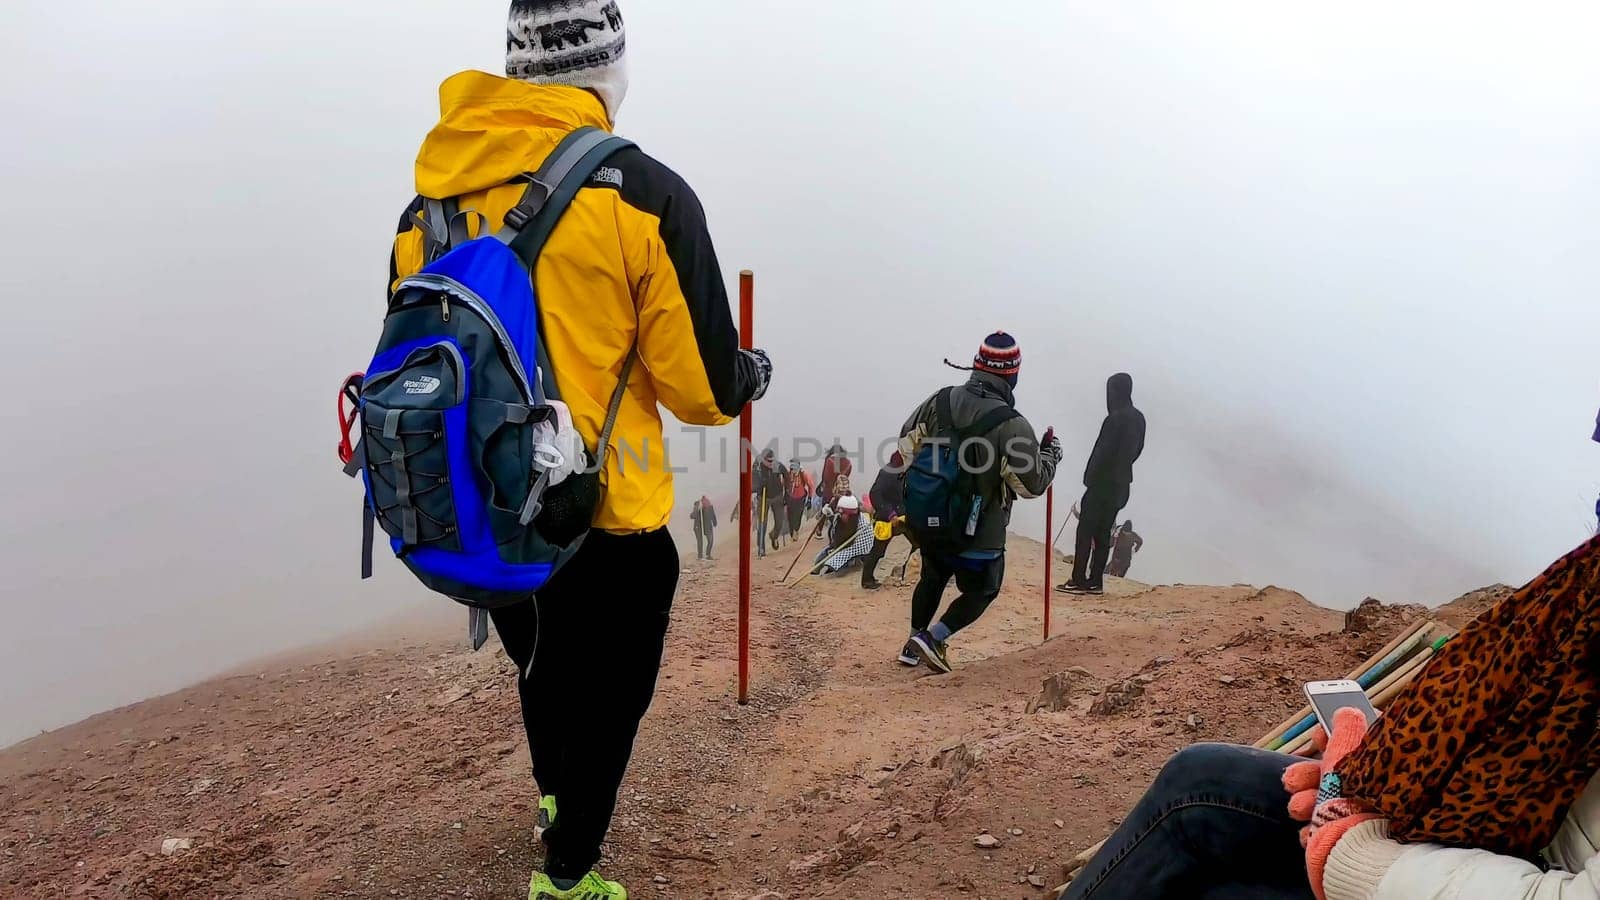 Cusco, Peru - February 9 2019 : Group of hikers on a foggy path up a mountain equipped with walking sticks and backpacks, the Rainbow mountain in Cusco - Peru